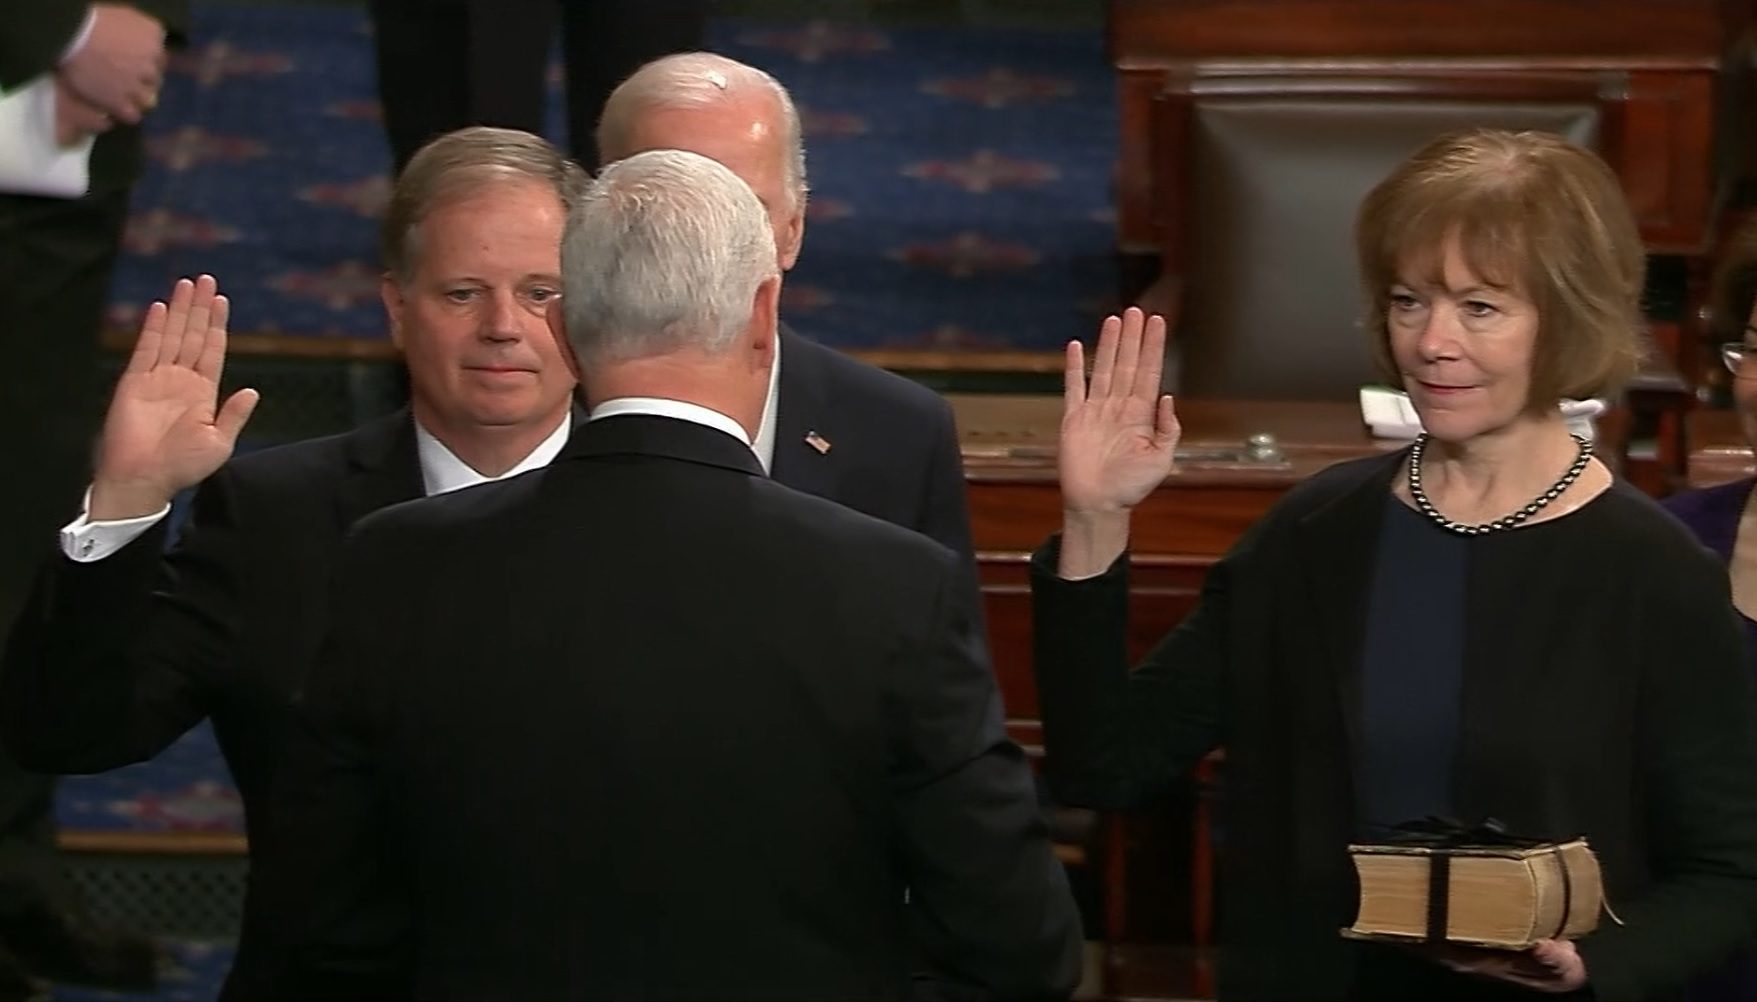 Doug Jones (D-AL) and Tina Smith (D-MN) Were Sworn in as the Newest Members of the 115th Congress